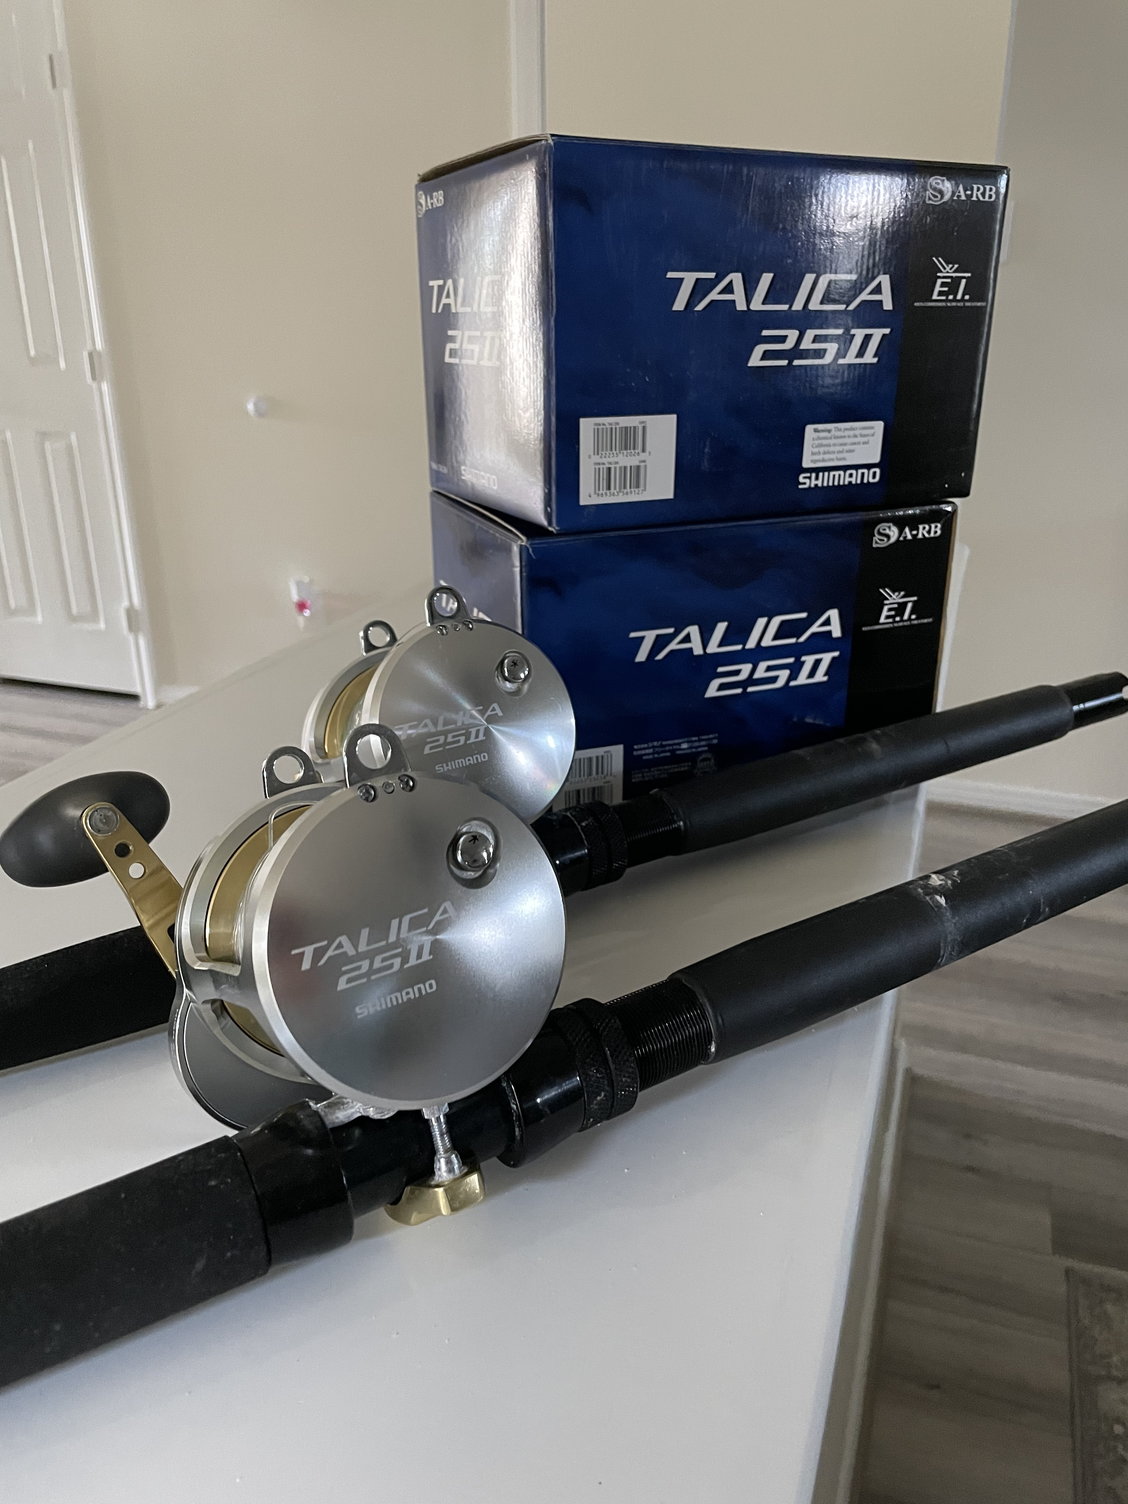 Shimano talica 25 combos - The Hull Truth - Boating and Fishing Forum